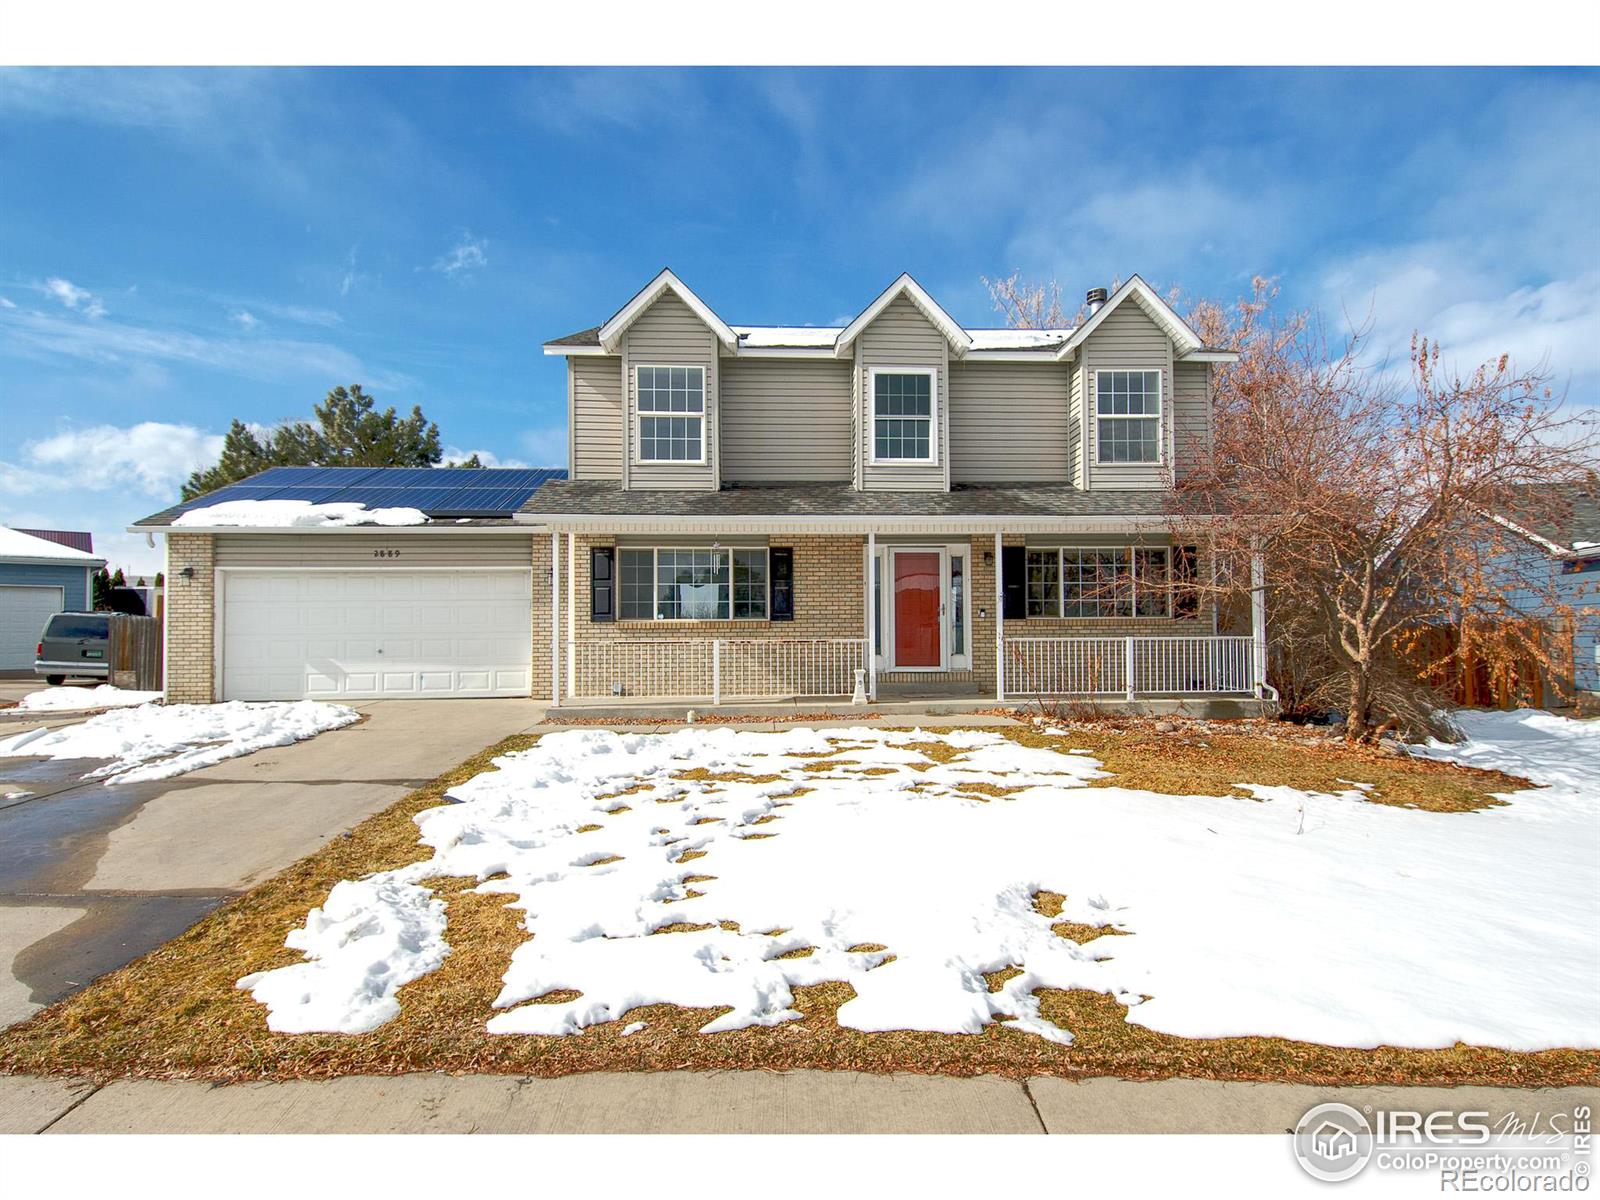 2889  44th Avenue, greeley MLS: 4567891003401 Beds: 6 Baths: 4 Price: $469,900